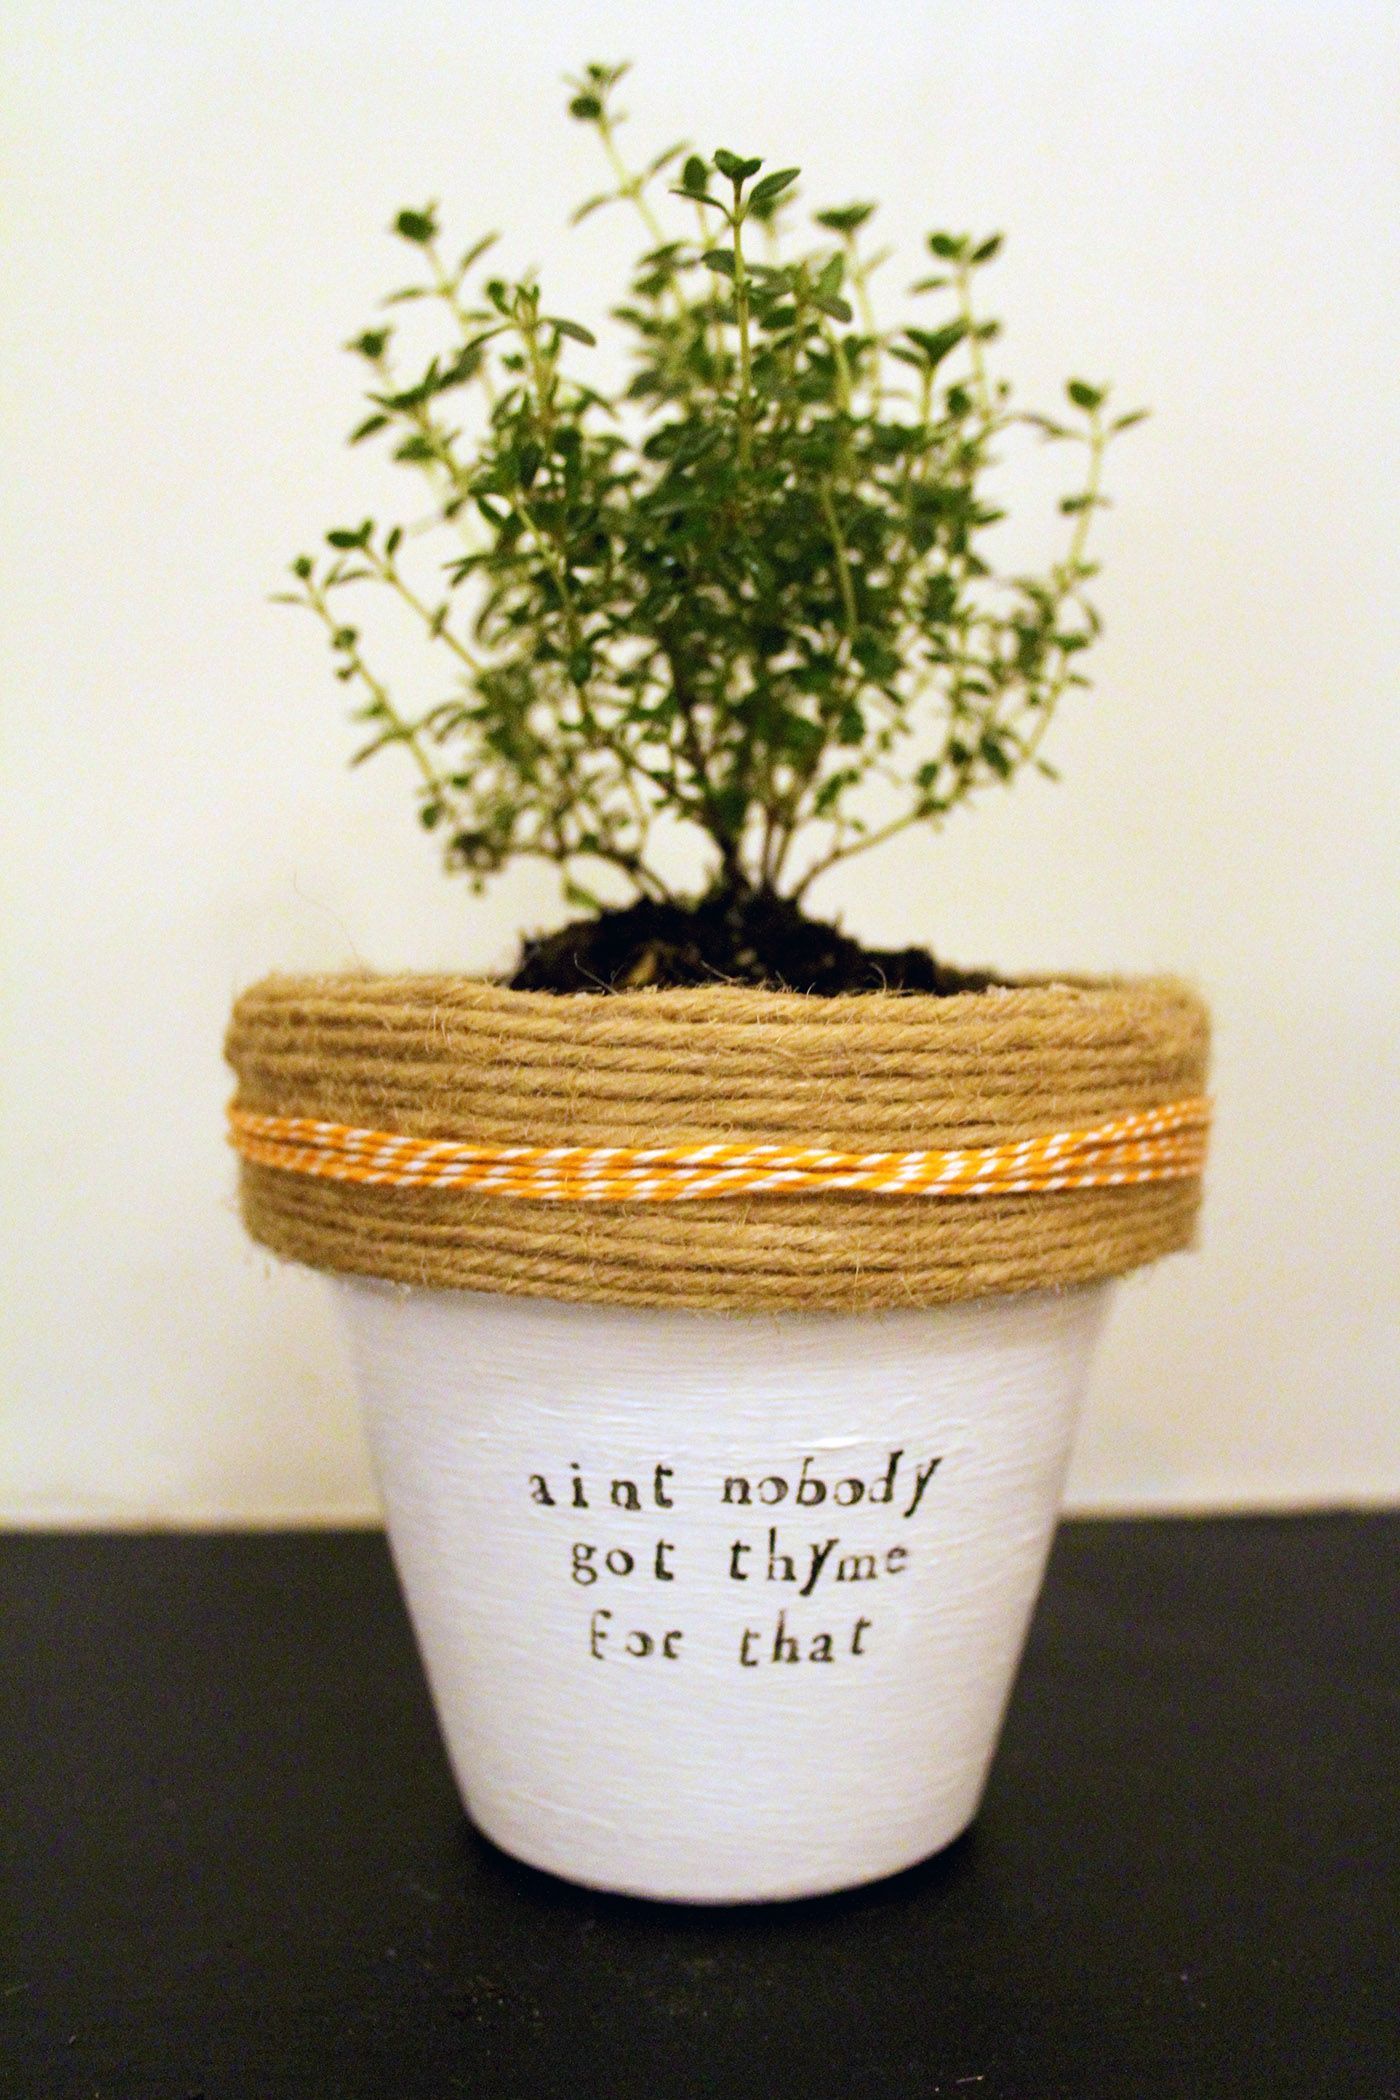 This is my favorite! Aint nobody got thyme for that! Plant themed puns! Check the whole store for more!